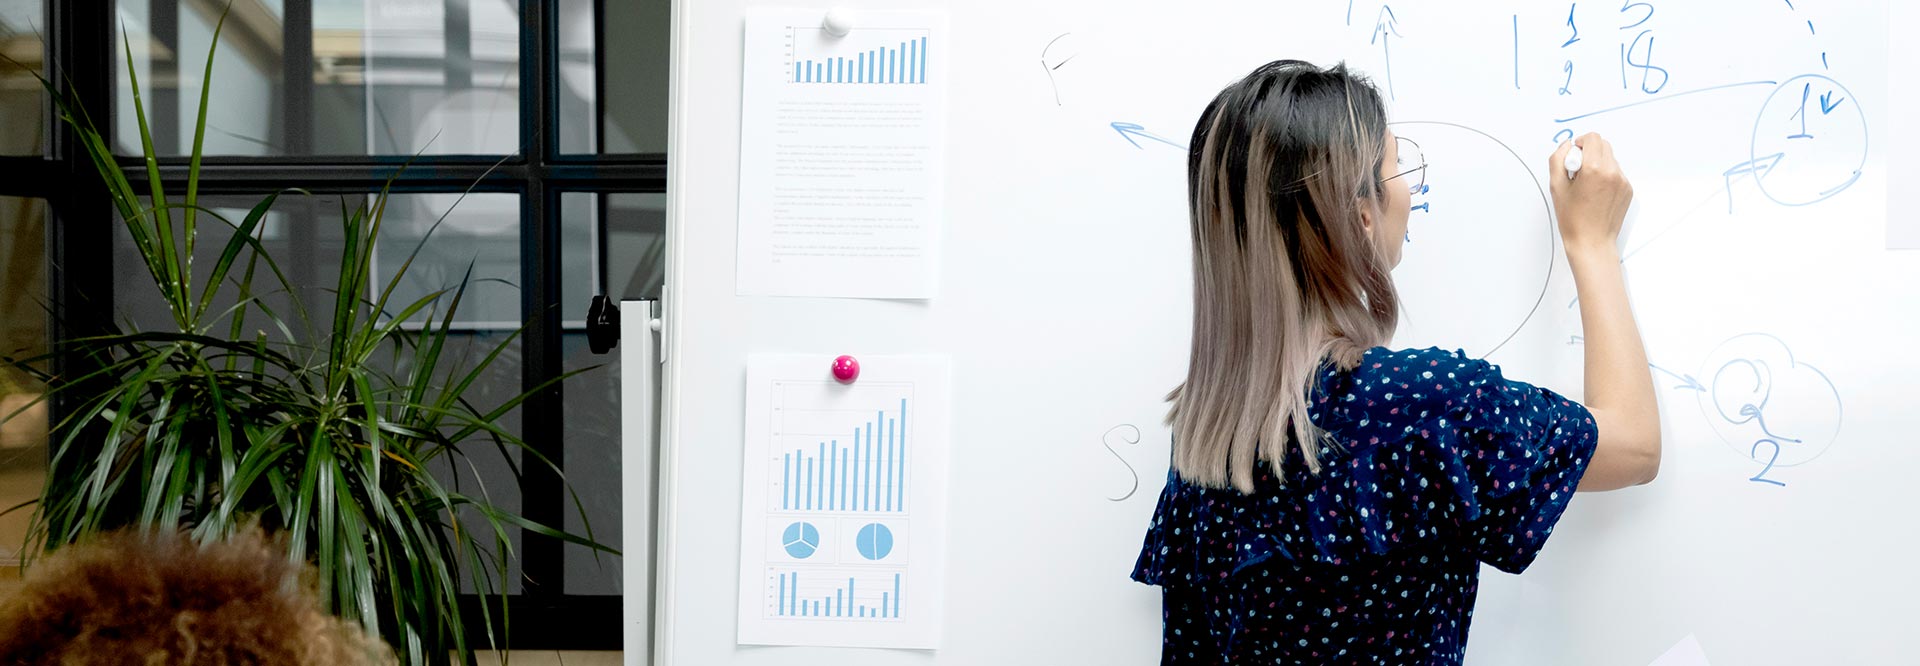 The picture shows a woman in a meeting, who is writing on a pin board with diagram printouts attached to it.